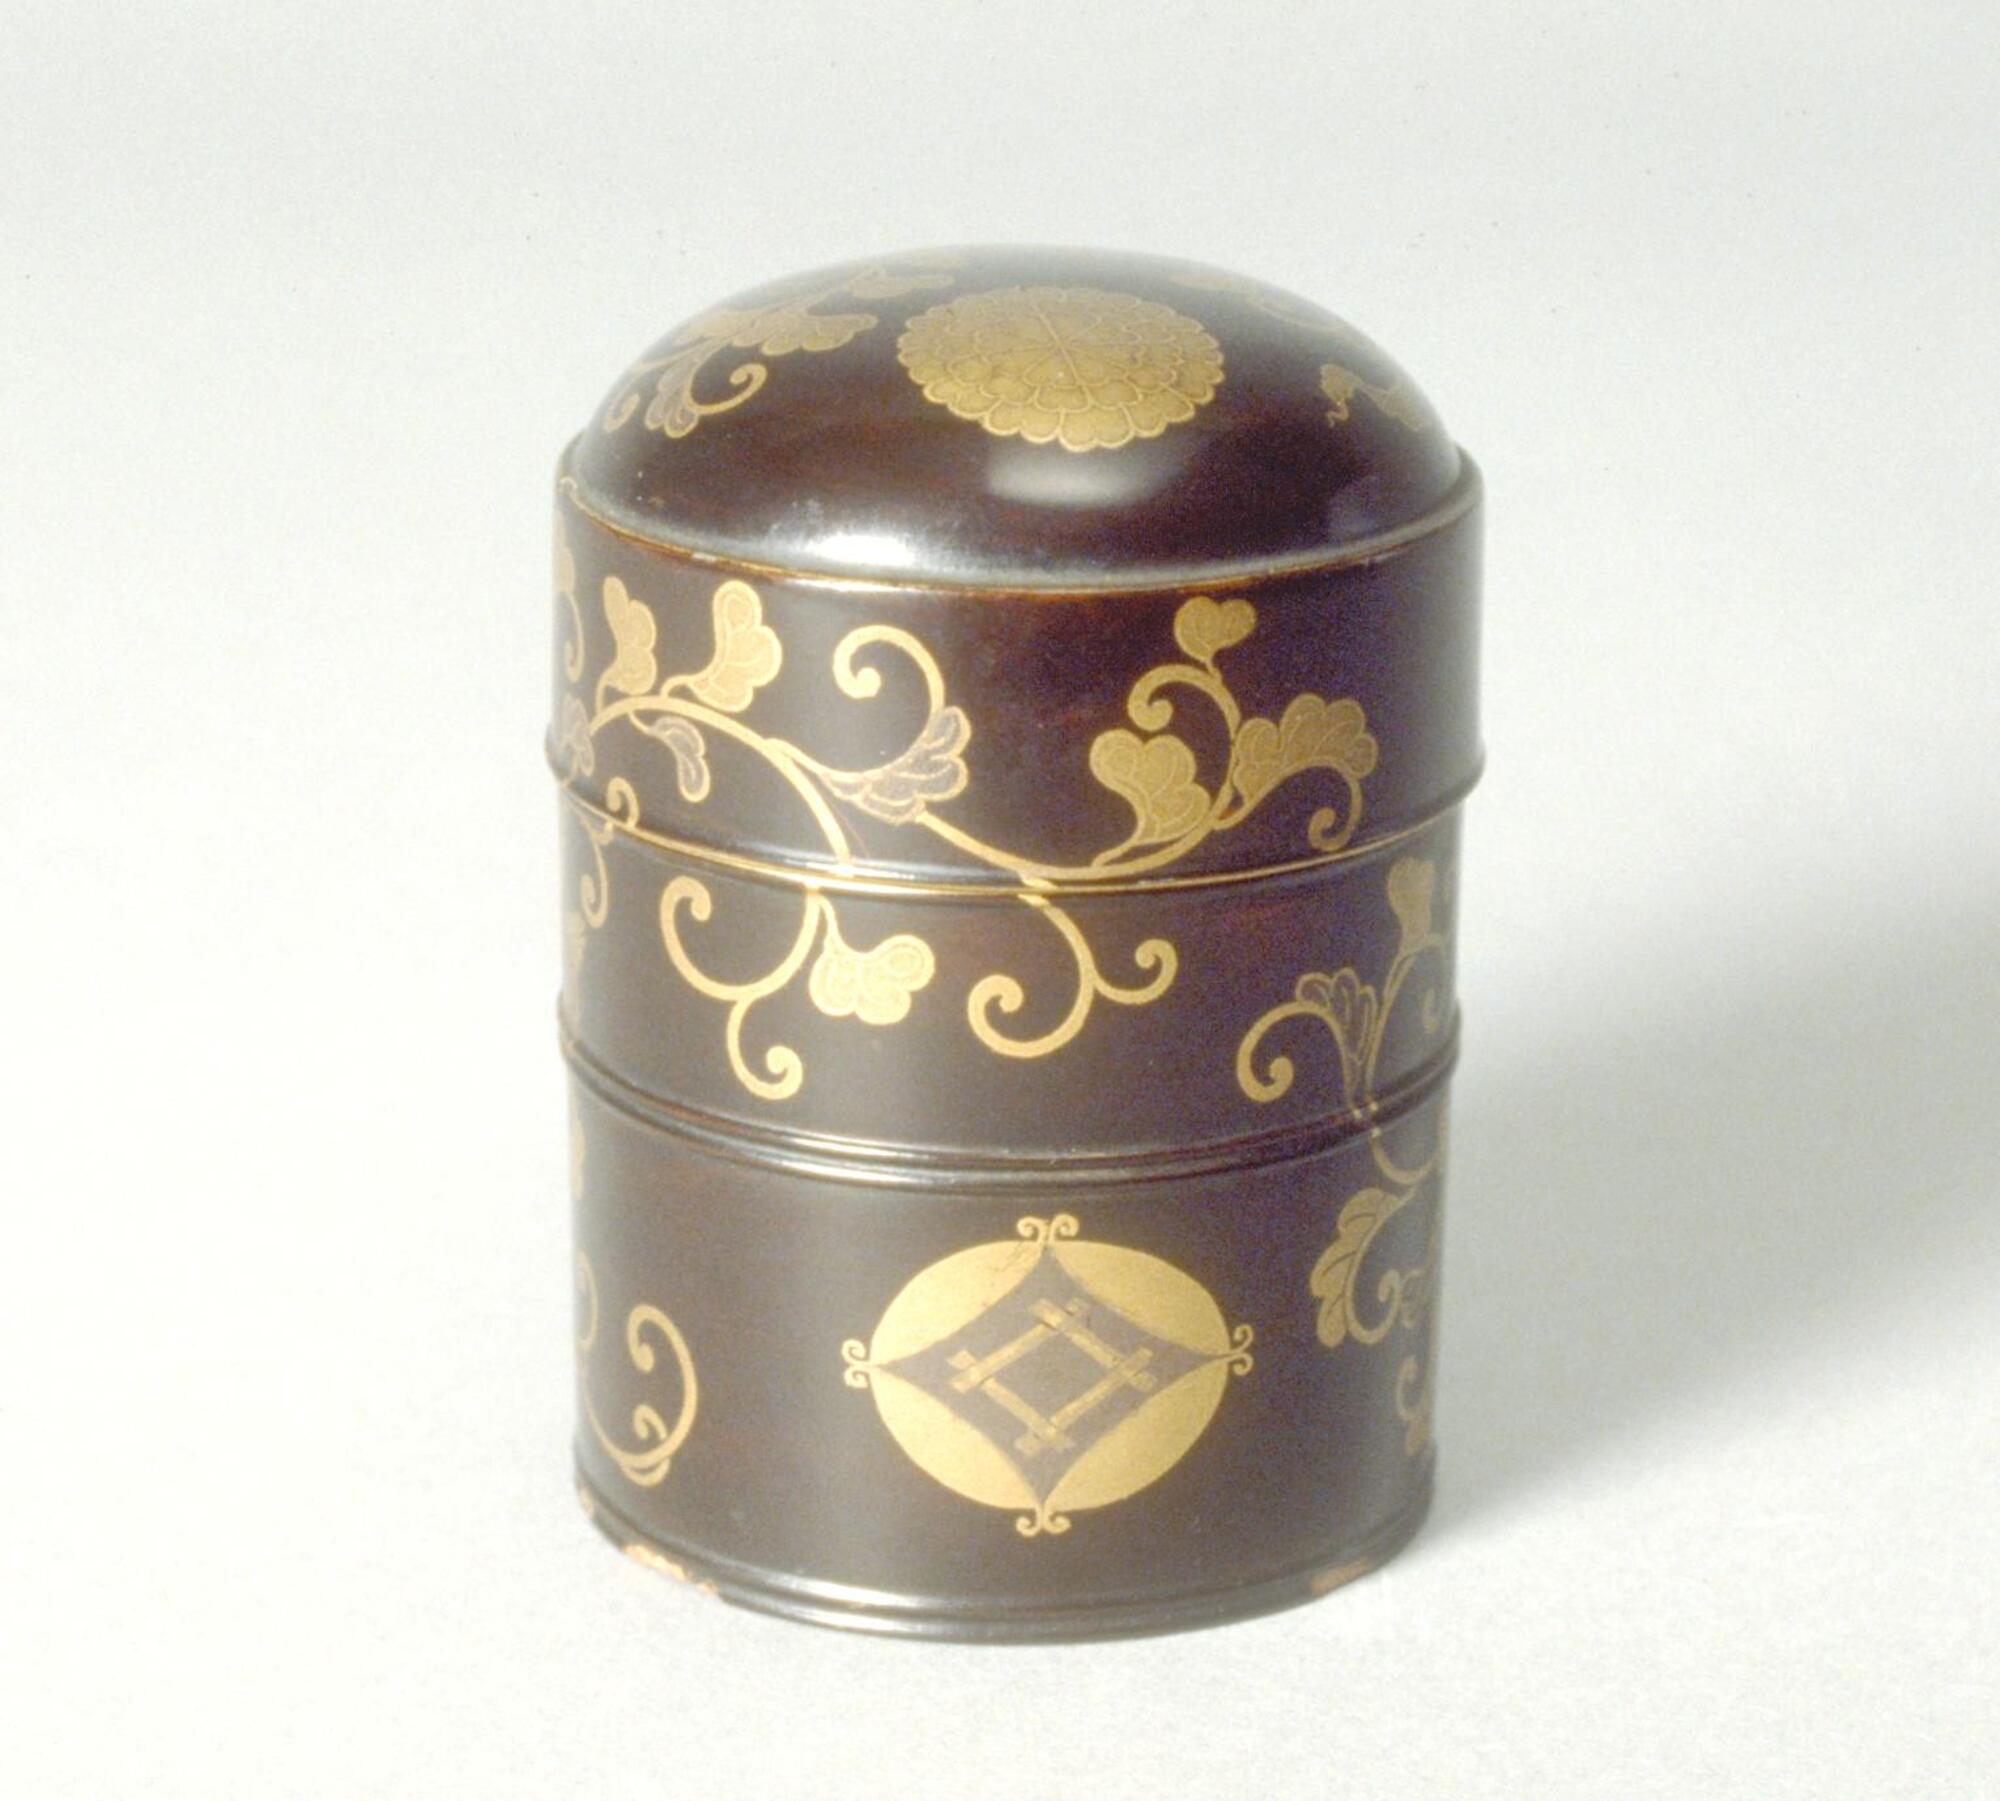 Small cylindrical container lacquered dark brown with gold floral patterns wraping around the object on all sides. There is also a chrysanthemum crest in gold on the rounded top of the container and a geometric crest near the bottom. This is the smaller of two containers. Part of a bridal trousseau.